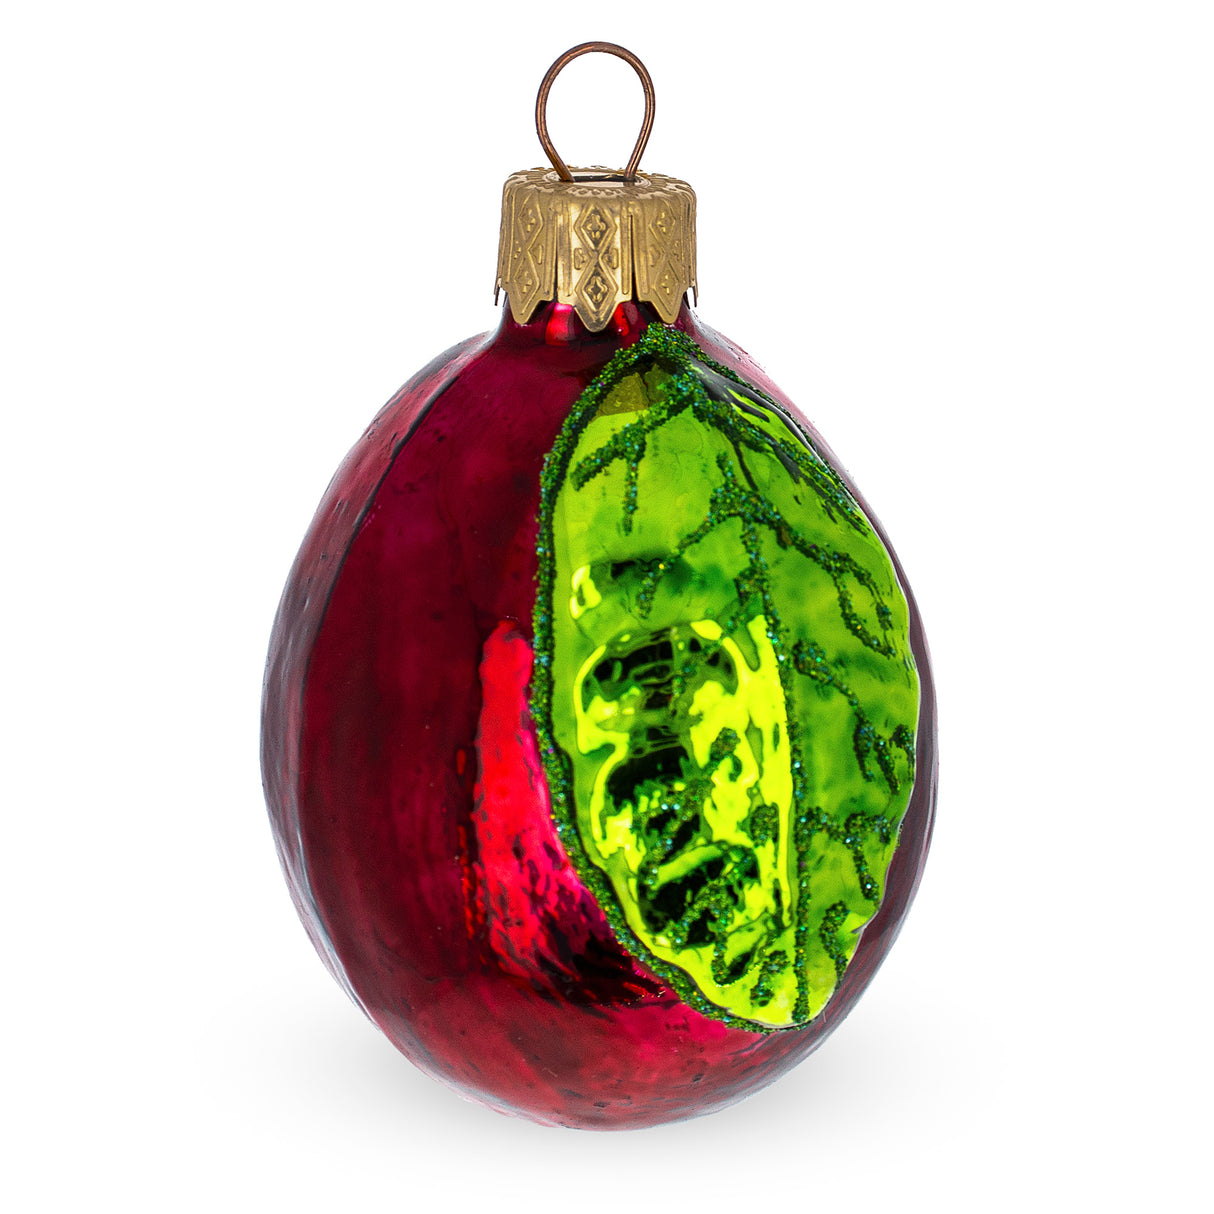 Plum with Shiny Leaf Glass Christmas Ornament in Red color, Oval shape